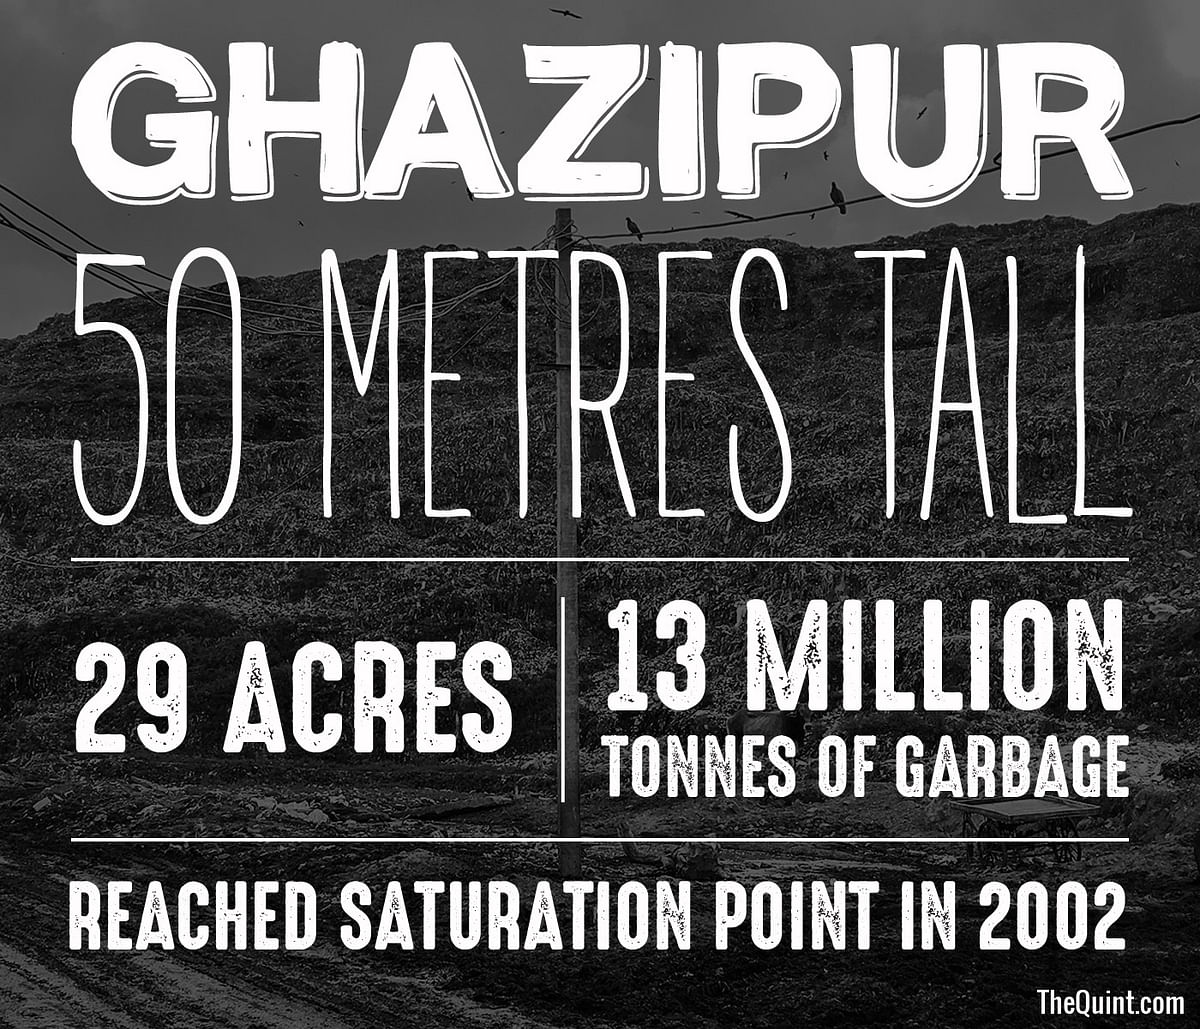 Three years after the launch of Swachh Bharat Abhiyan, Delhi’s Ghazipur landfill stands testimony to its failure.